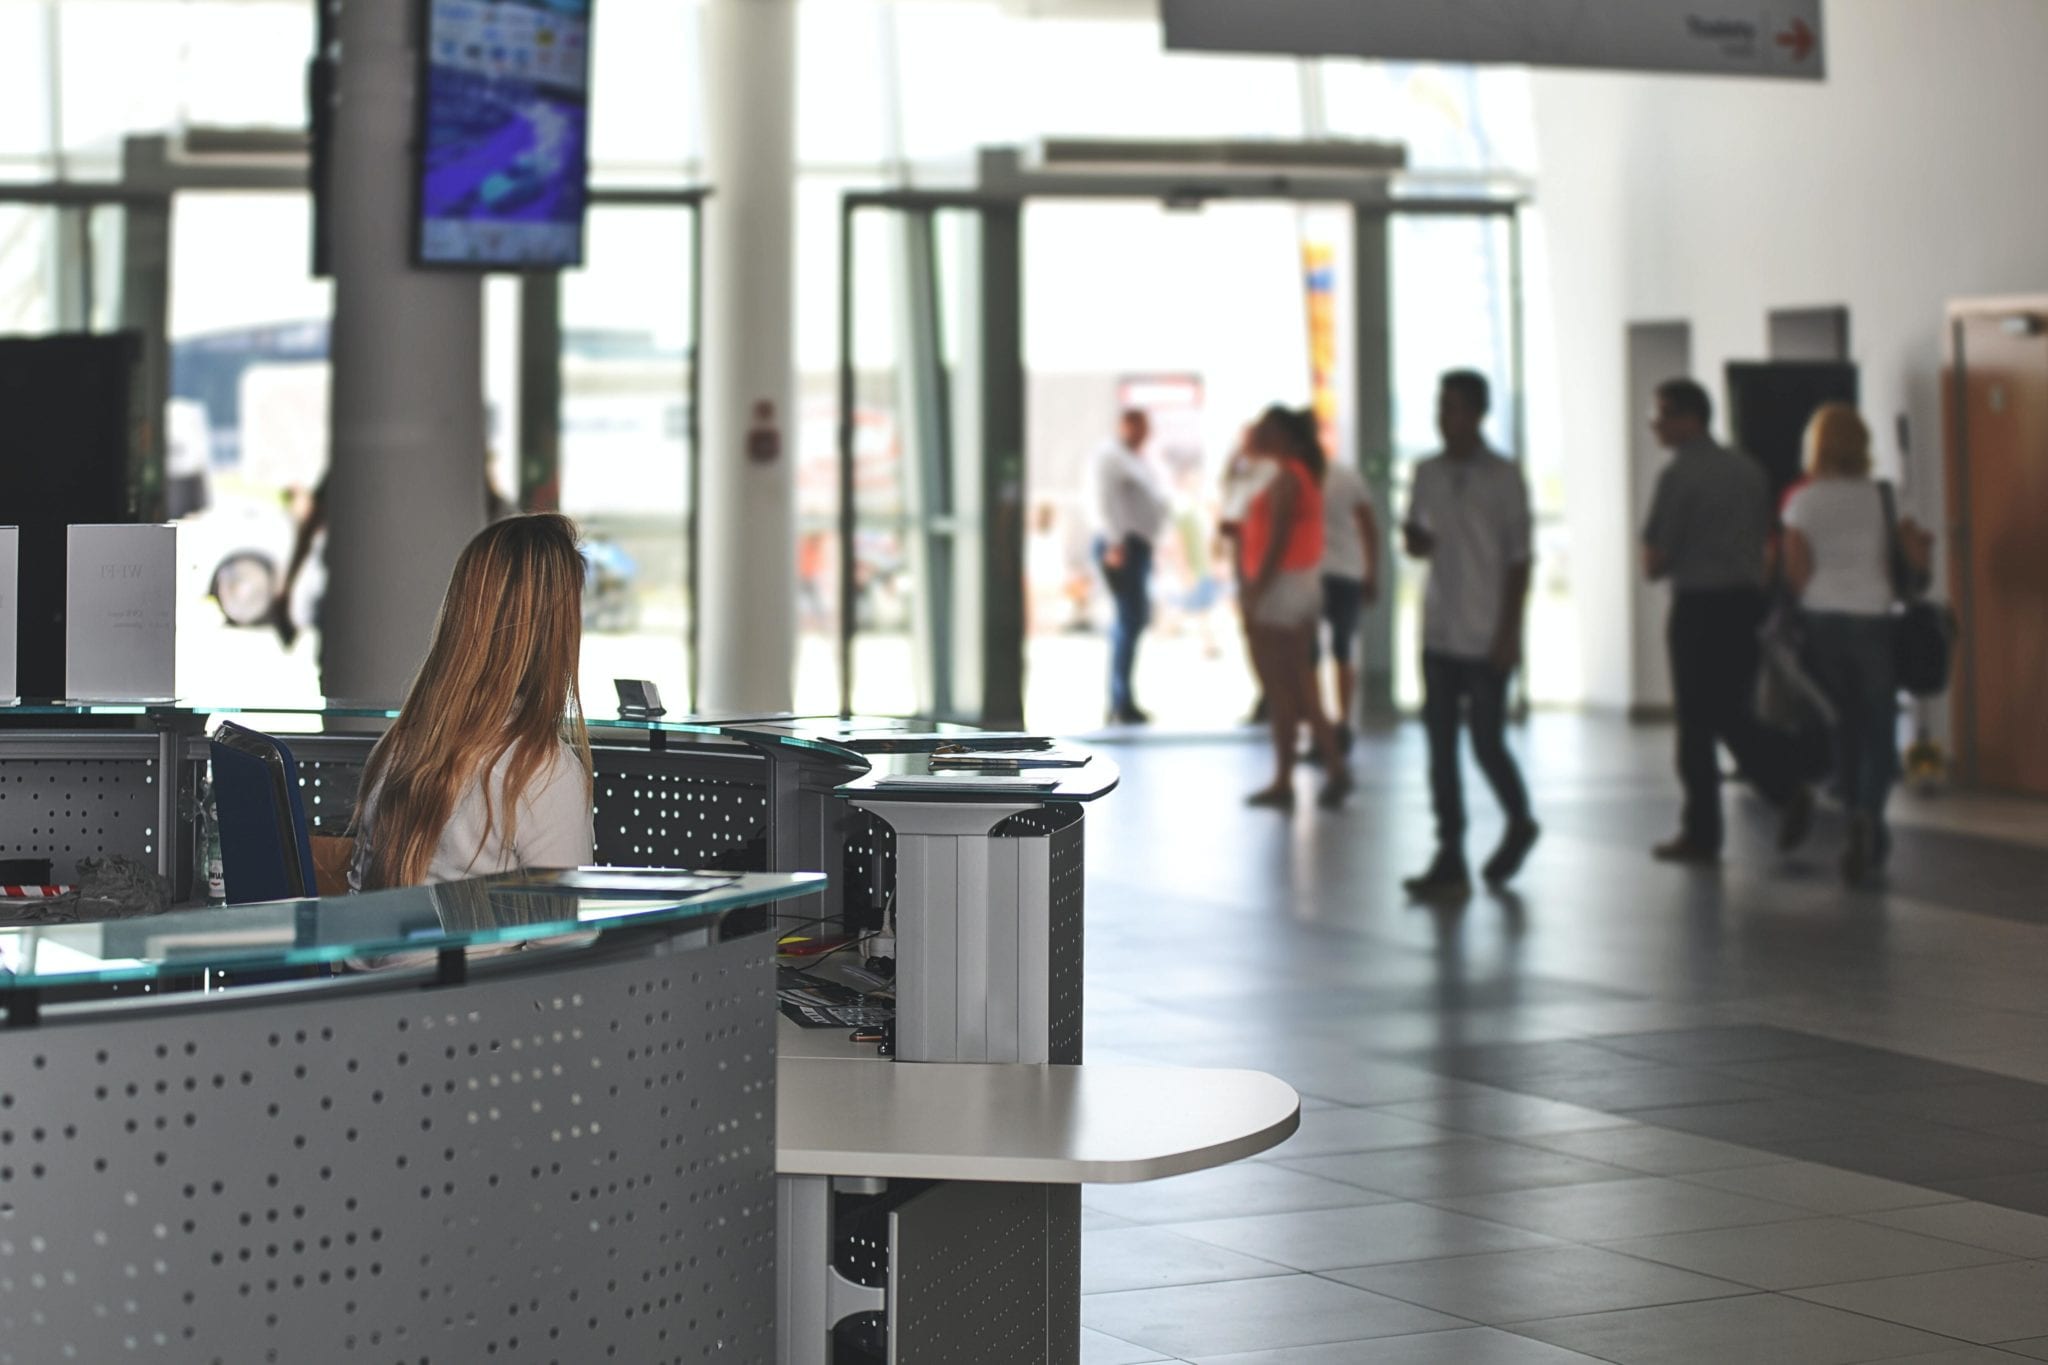 Lobby Digital Signage Ideas: How To Use It Effectively